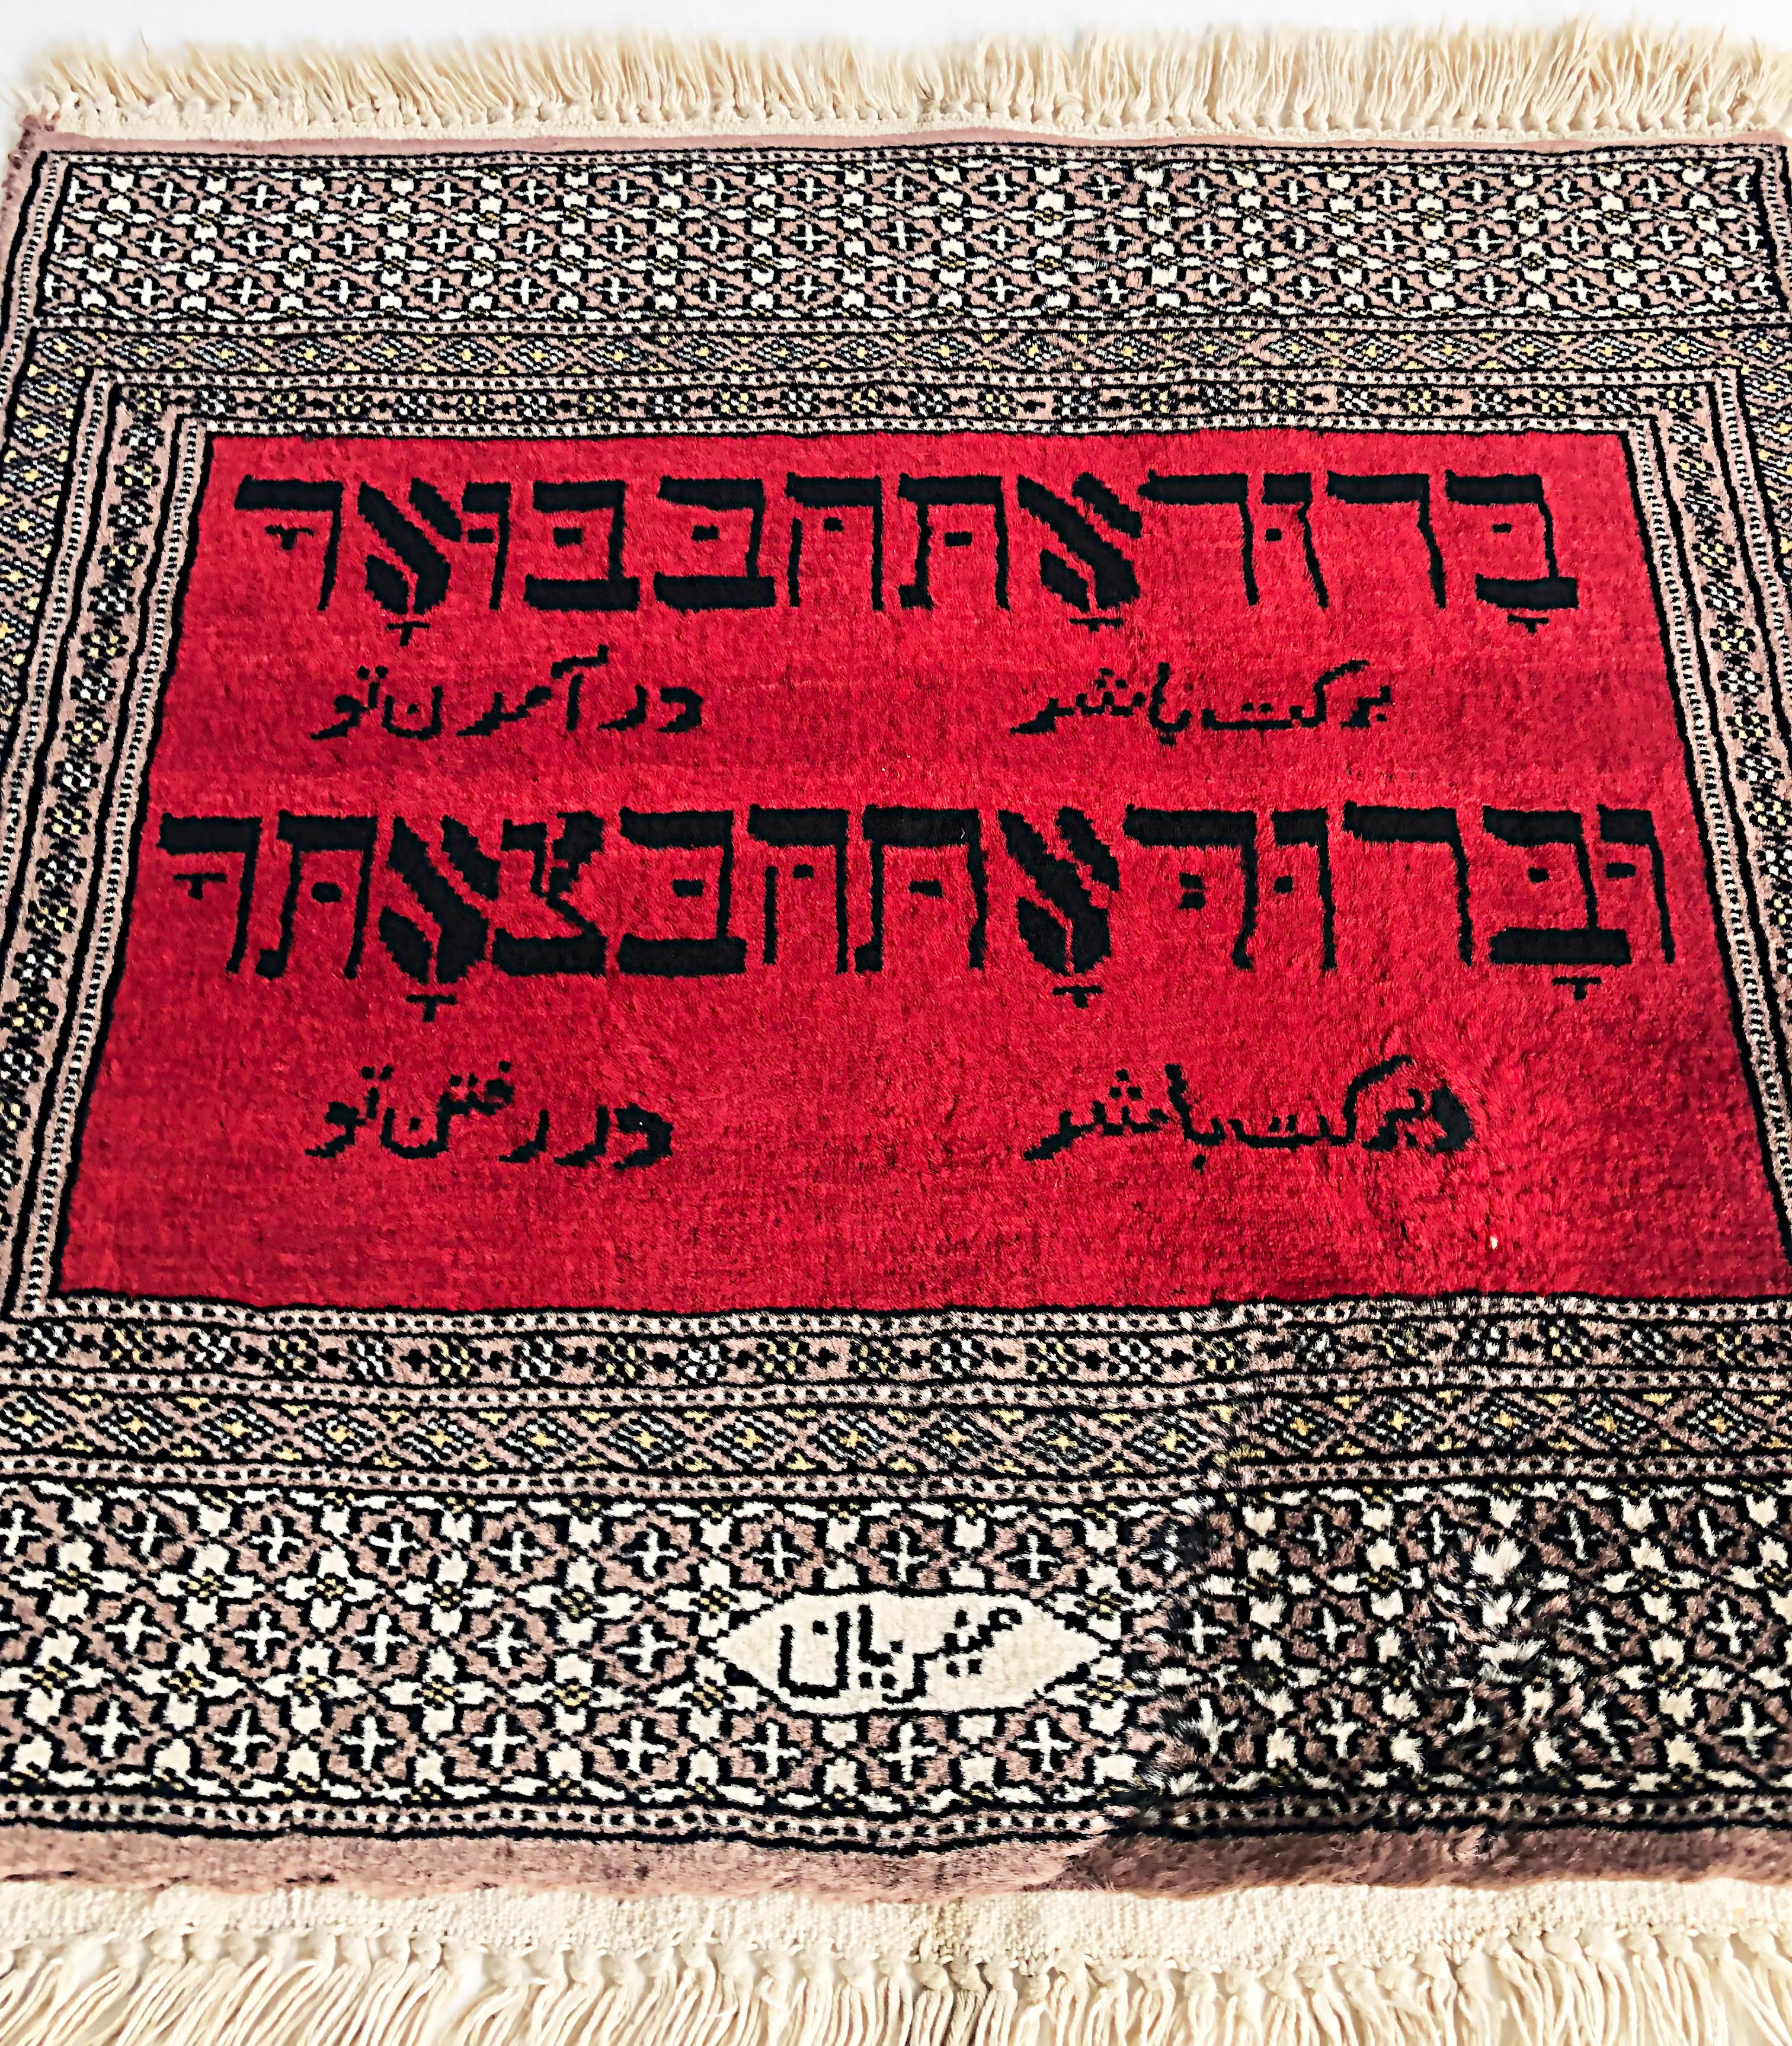 Diminutive Wool Prayer Rug with Hebrew Text , Signed

Offered for sale is a woven prayer rug featuring Hebrew text in two lines each against a red background framed by floral and geometric borders.  The Hebrew text translates to 